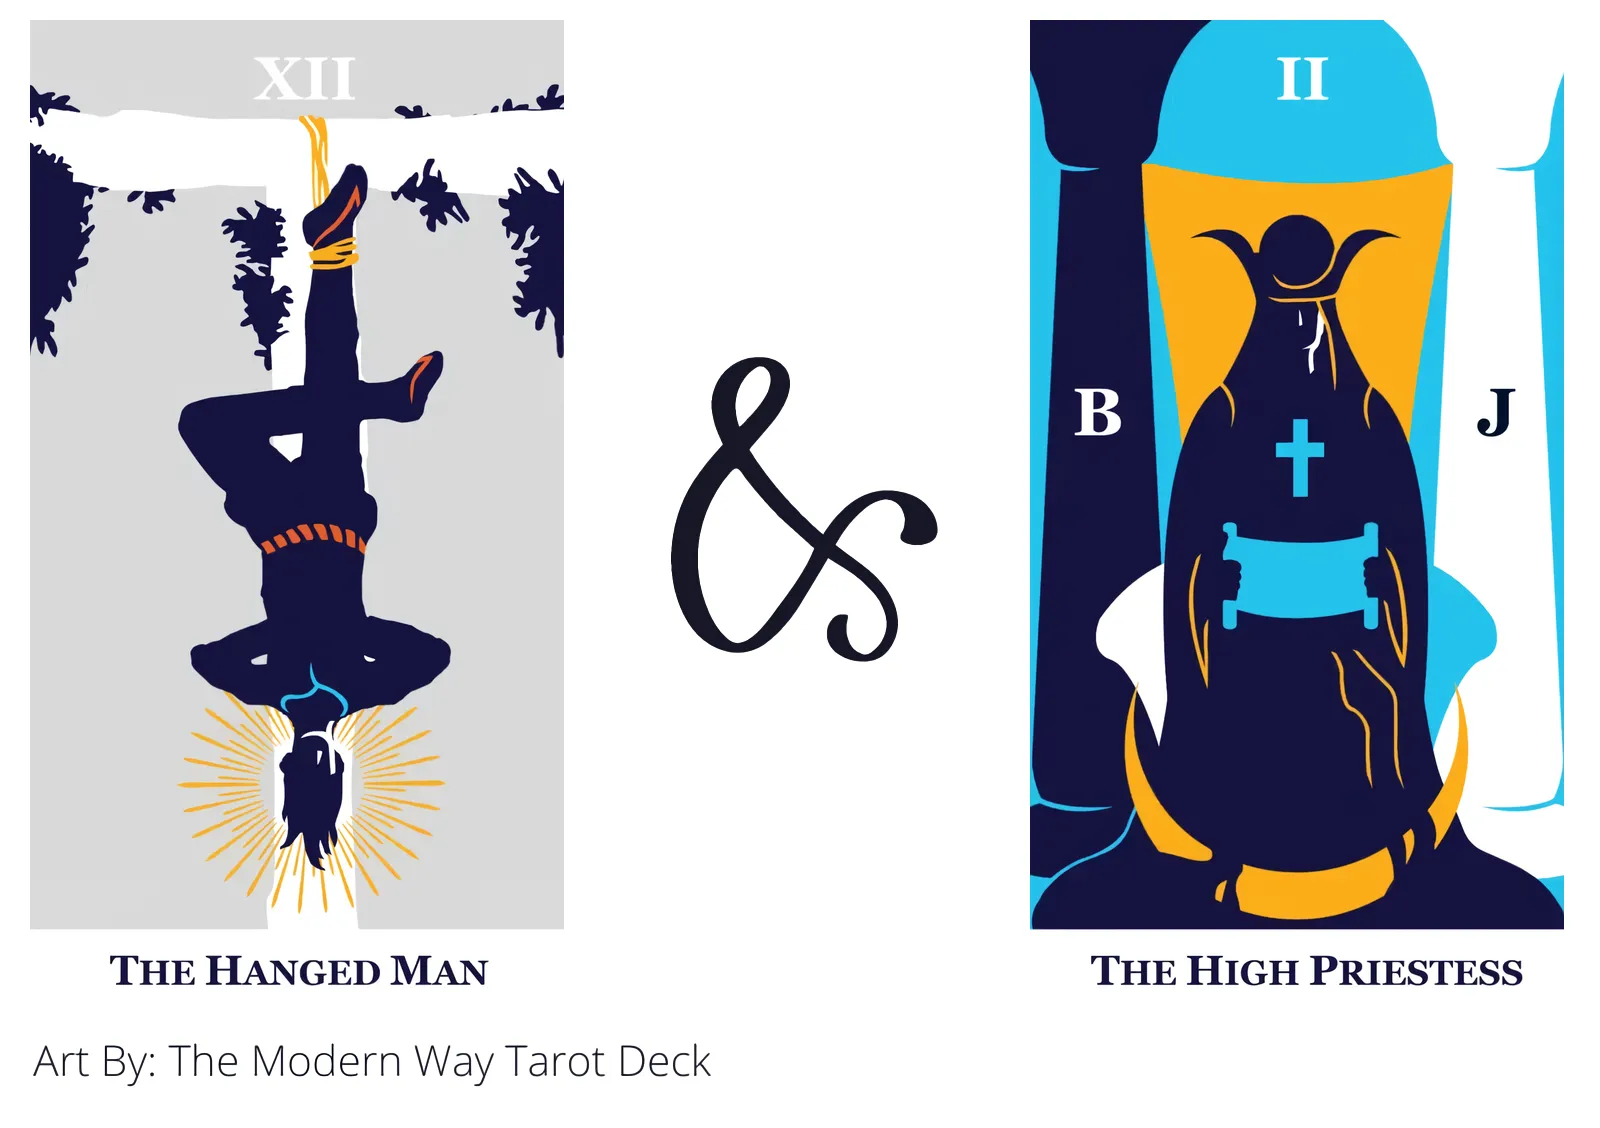 the hanged man and the high priestess tarot cards together